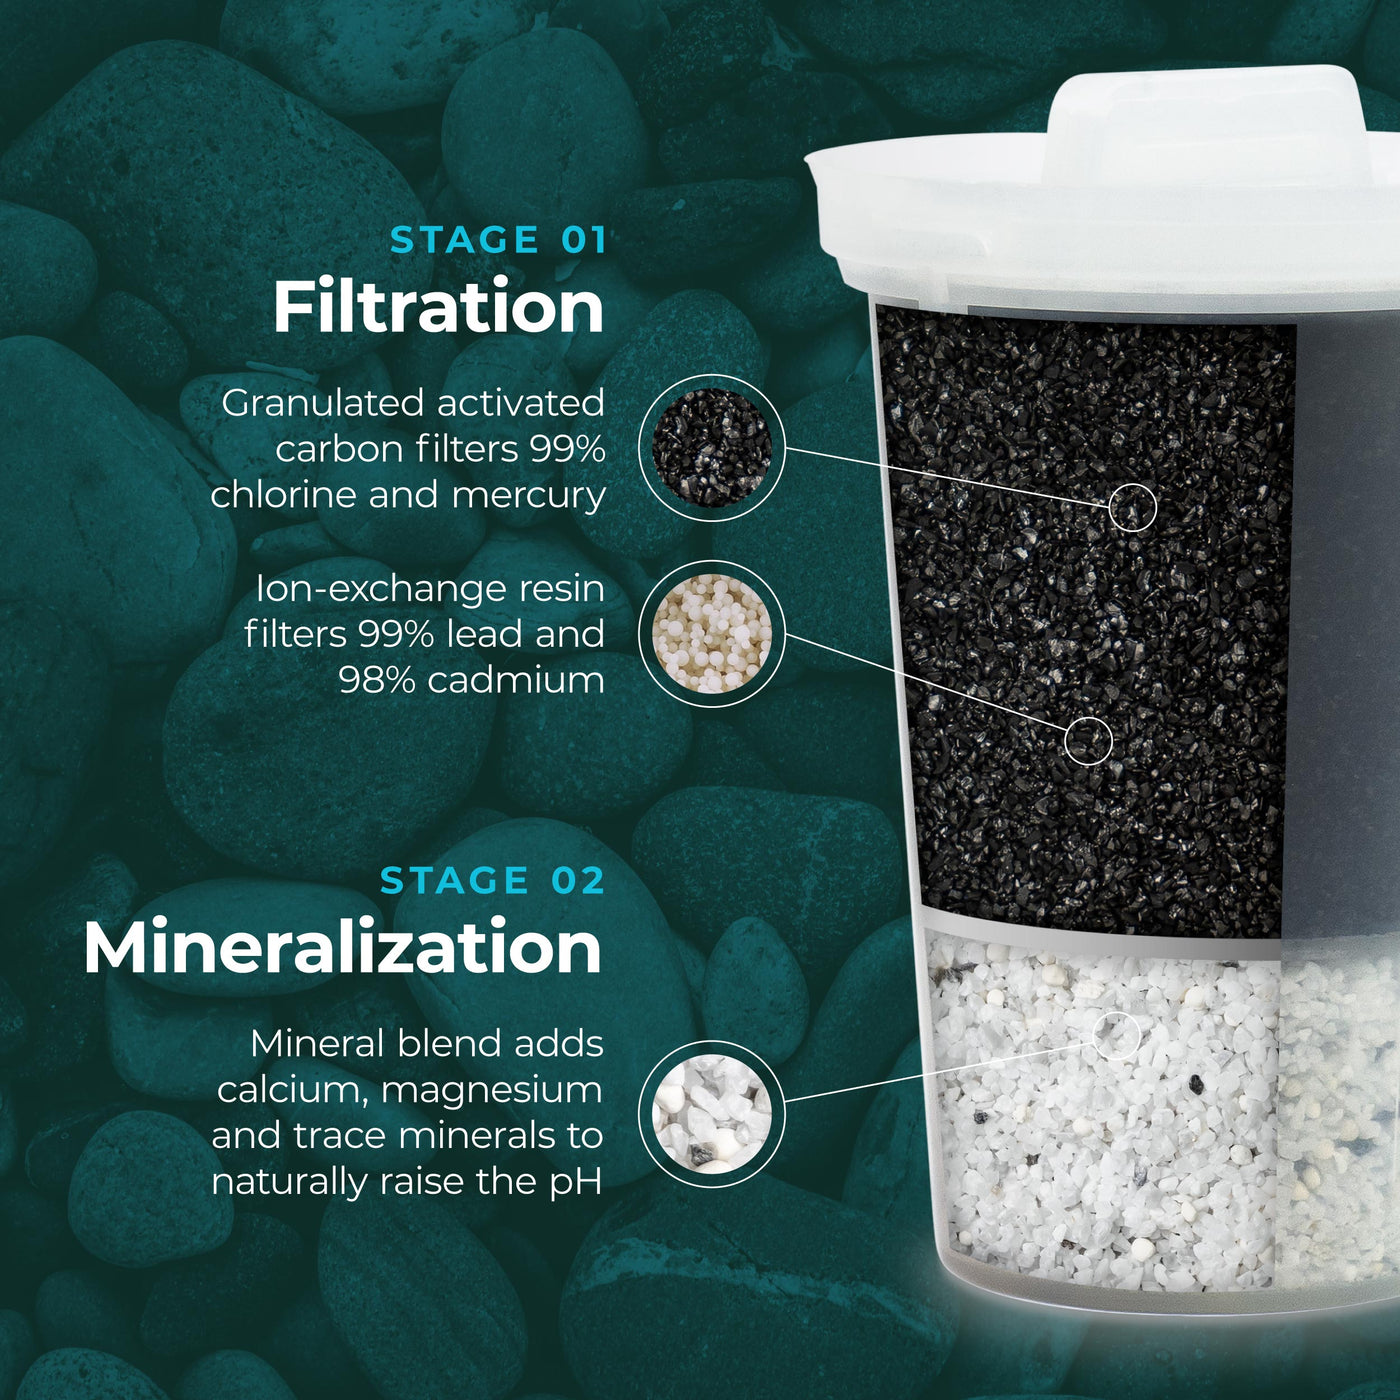 The Santevia MINA Alkaline Pitcher filter cutaway showing the granulated activated carbon and minerals within the filter#colour_white